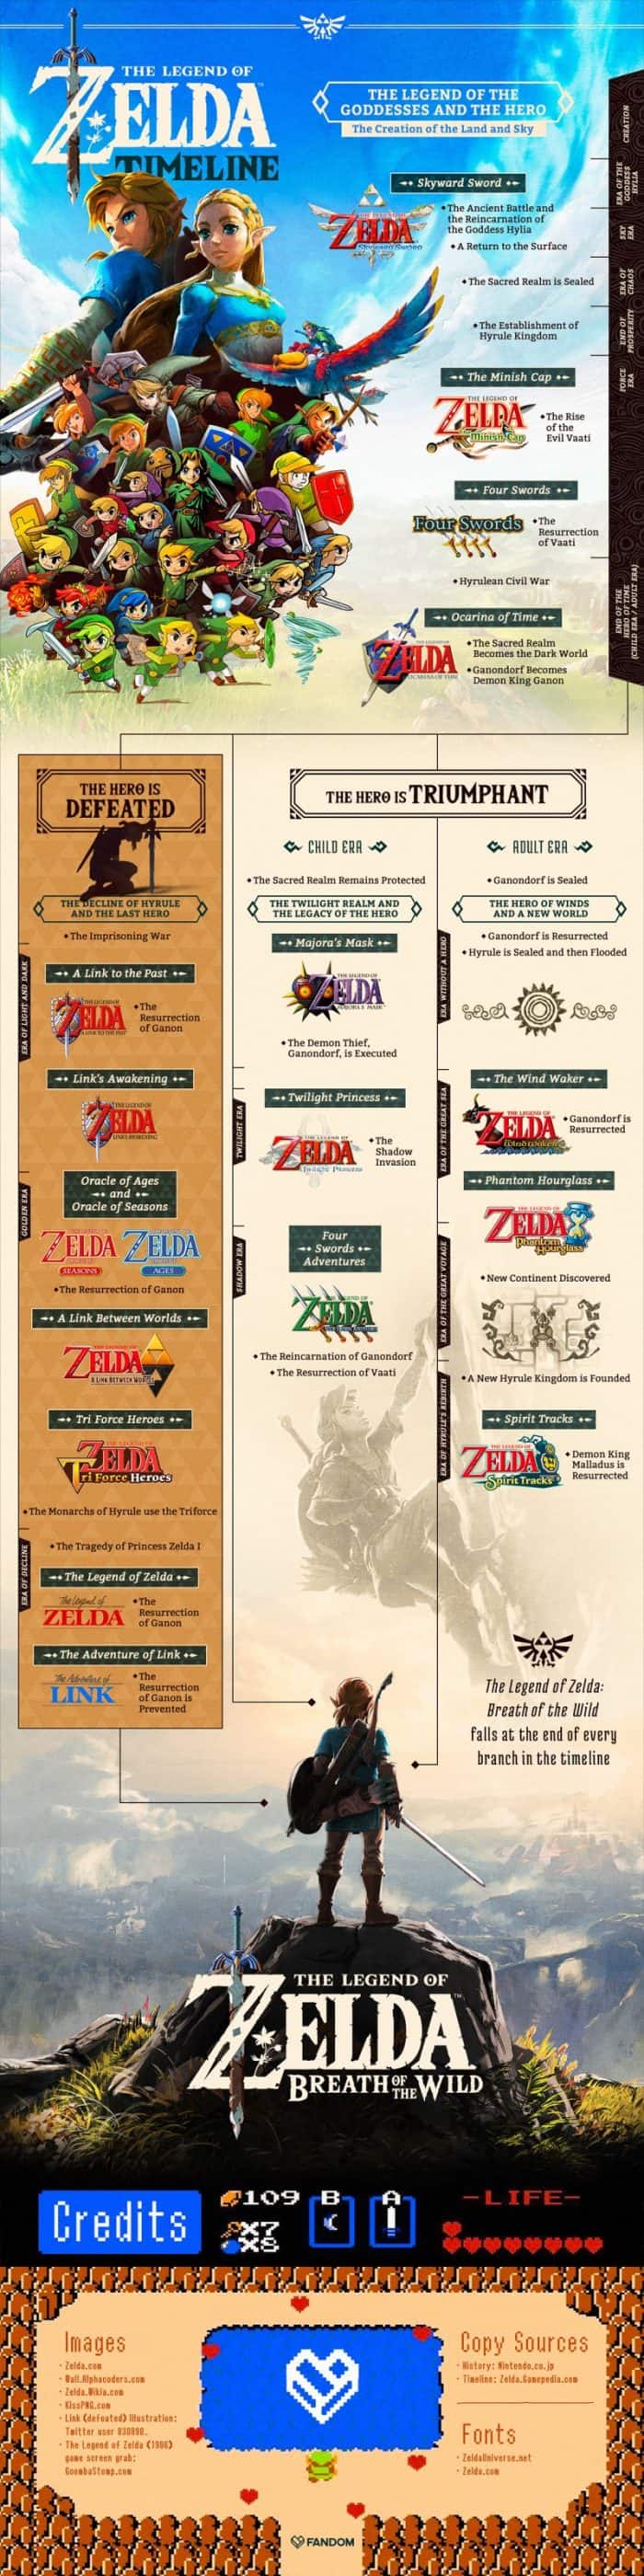 A graphic timeline of the chronology of The Legen of Zelda series